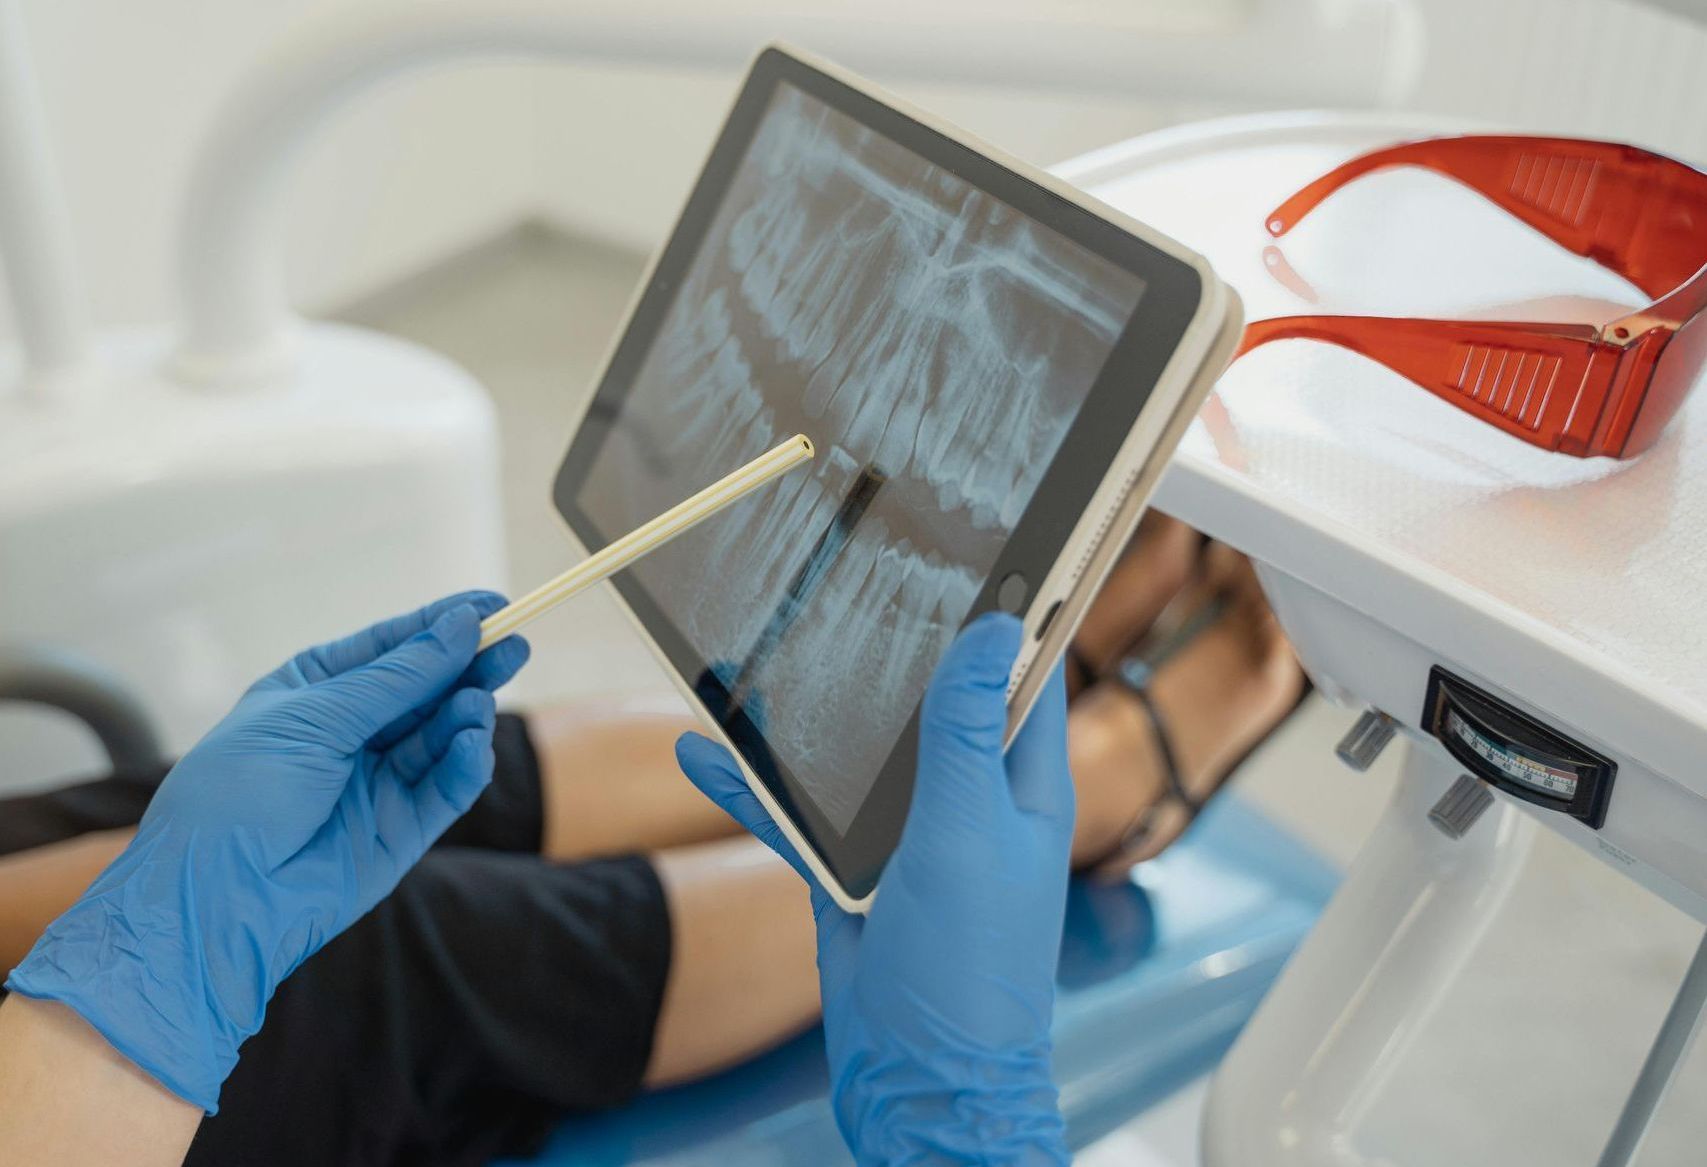 A dentist is looking at an x-ray of a patient 's teeth on a tablet.